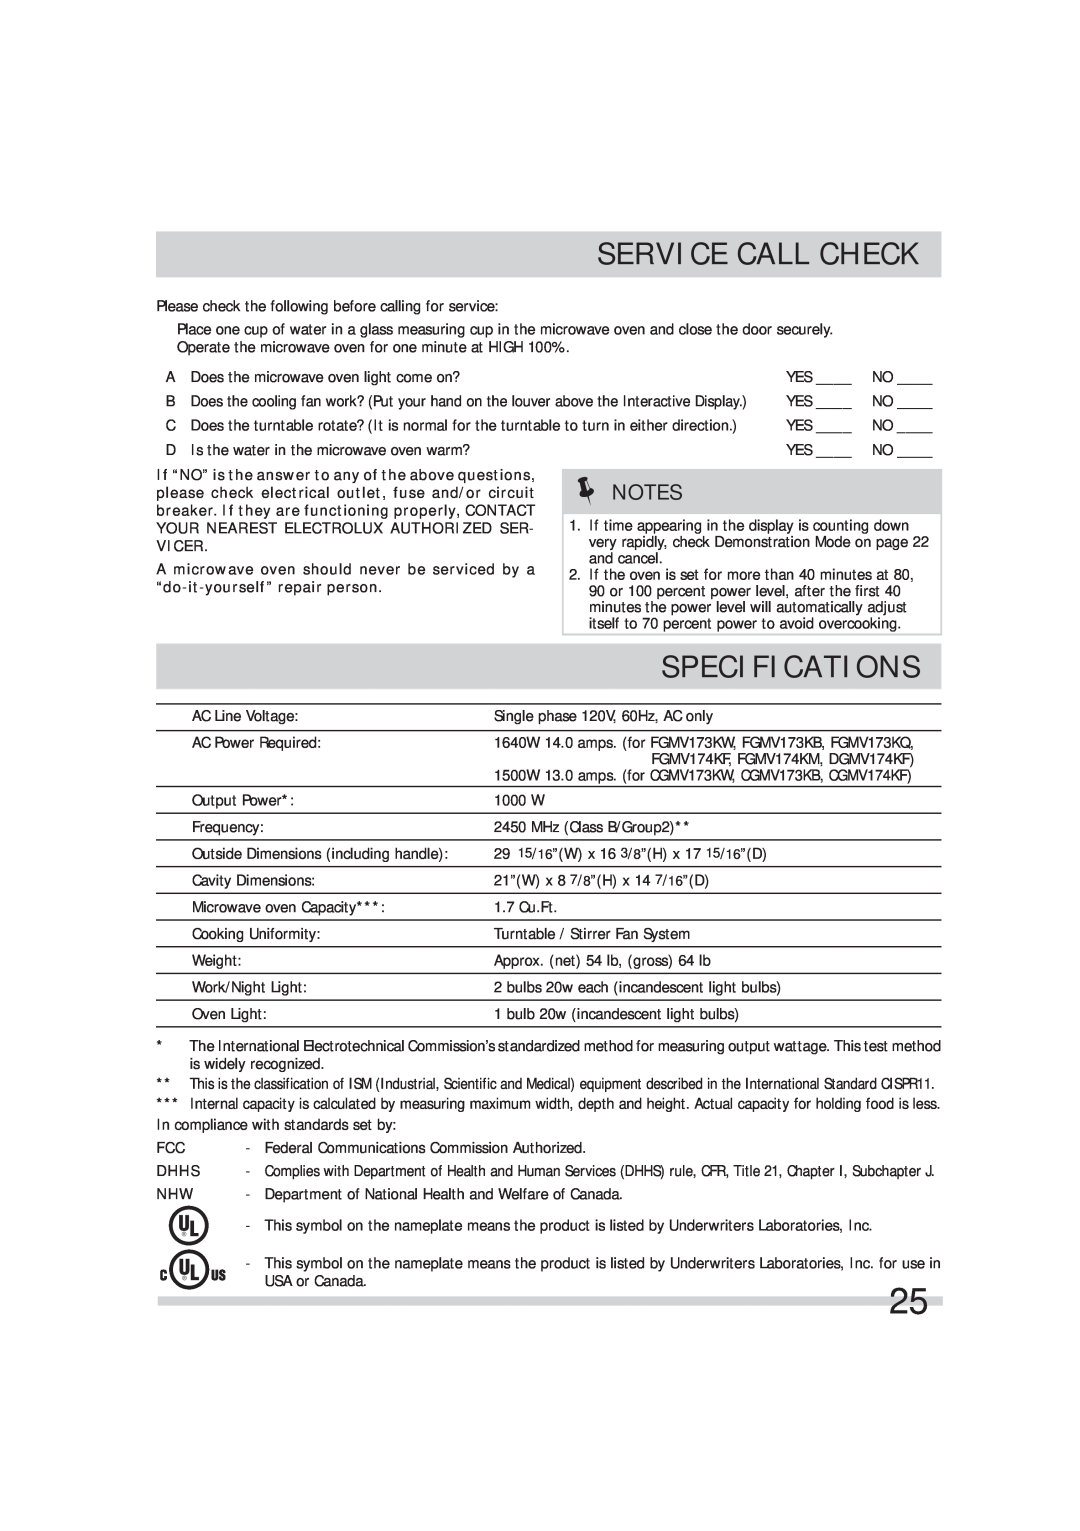 Frigidaire FGMV174KM Service Call Check, Specifications, If “NO” is the answer to any of the above questions, Vicer, Dhhs 